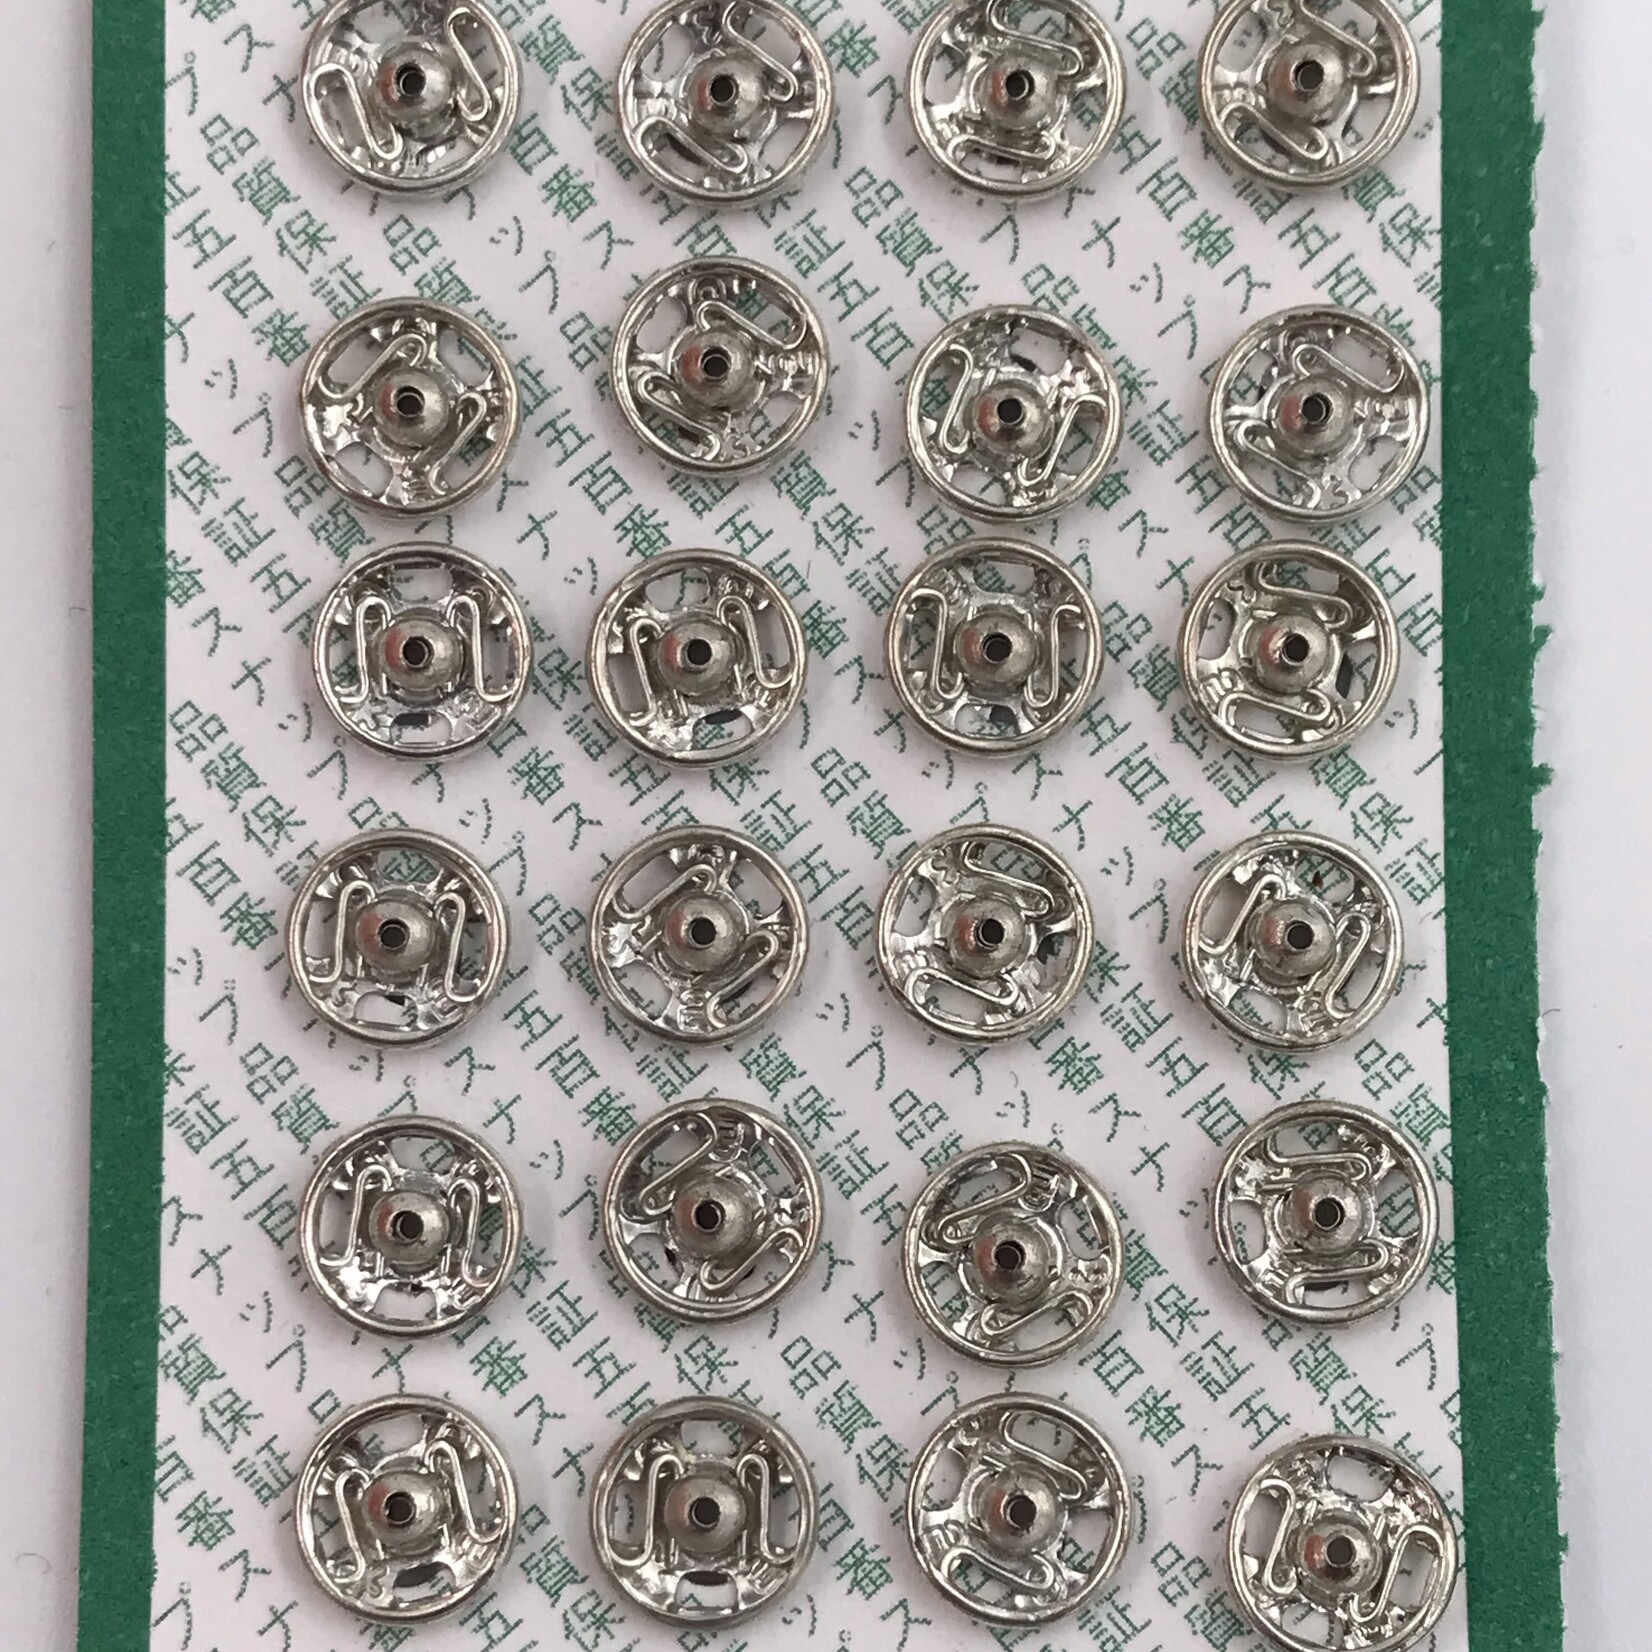 Brand Press Studs Snap Fasteners (24 Pieces / Card) Nickelled 7MM